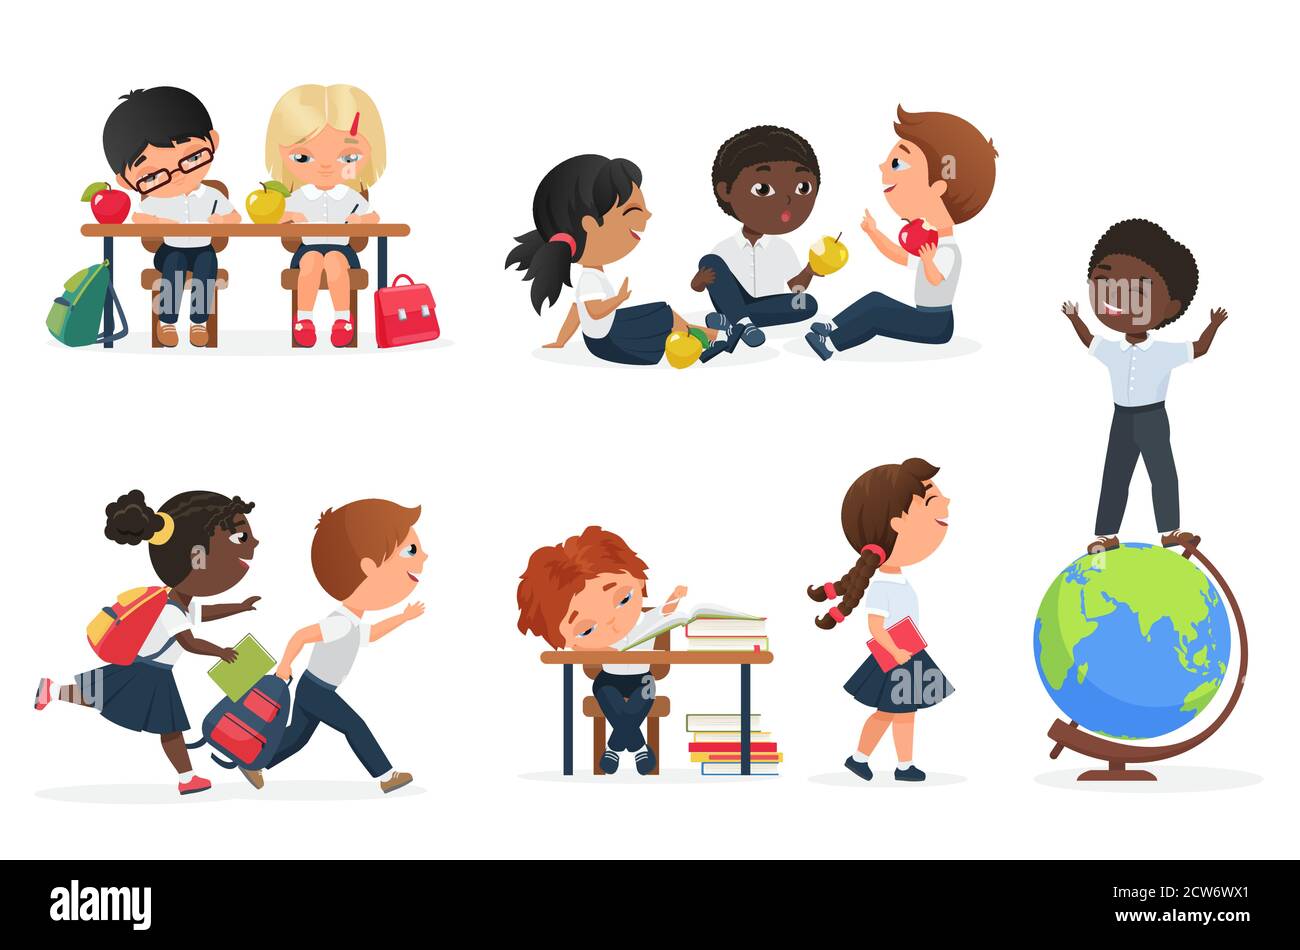 Student Characters Vector Set School Kids Cartoon Characters Wearing School Uniform With Various Poses And Gestures For Education Related Design Stock Vector Image Art Alamy